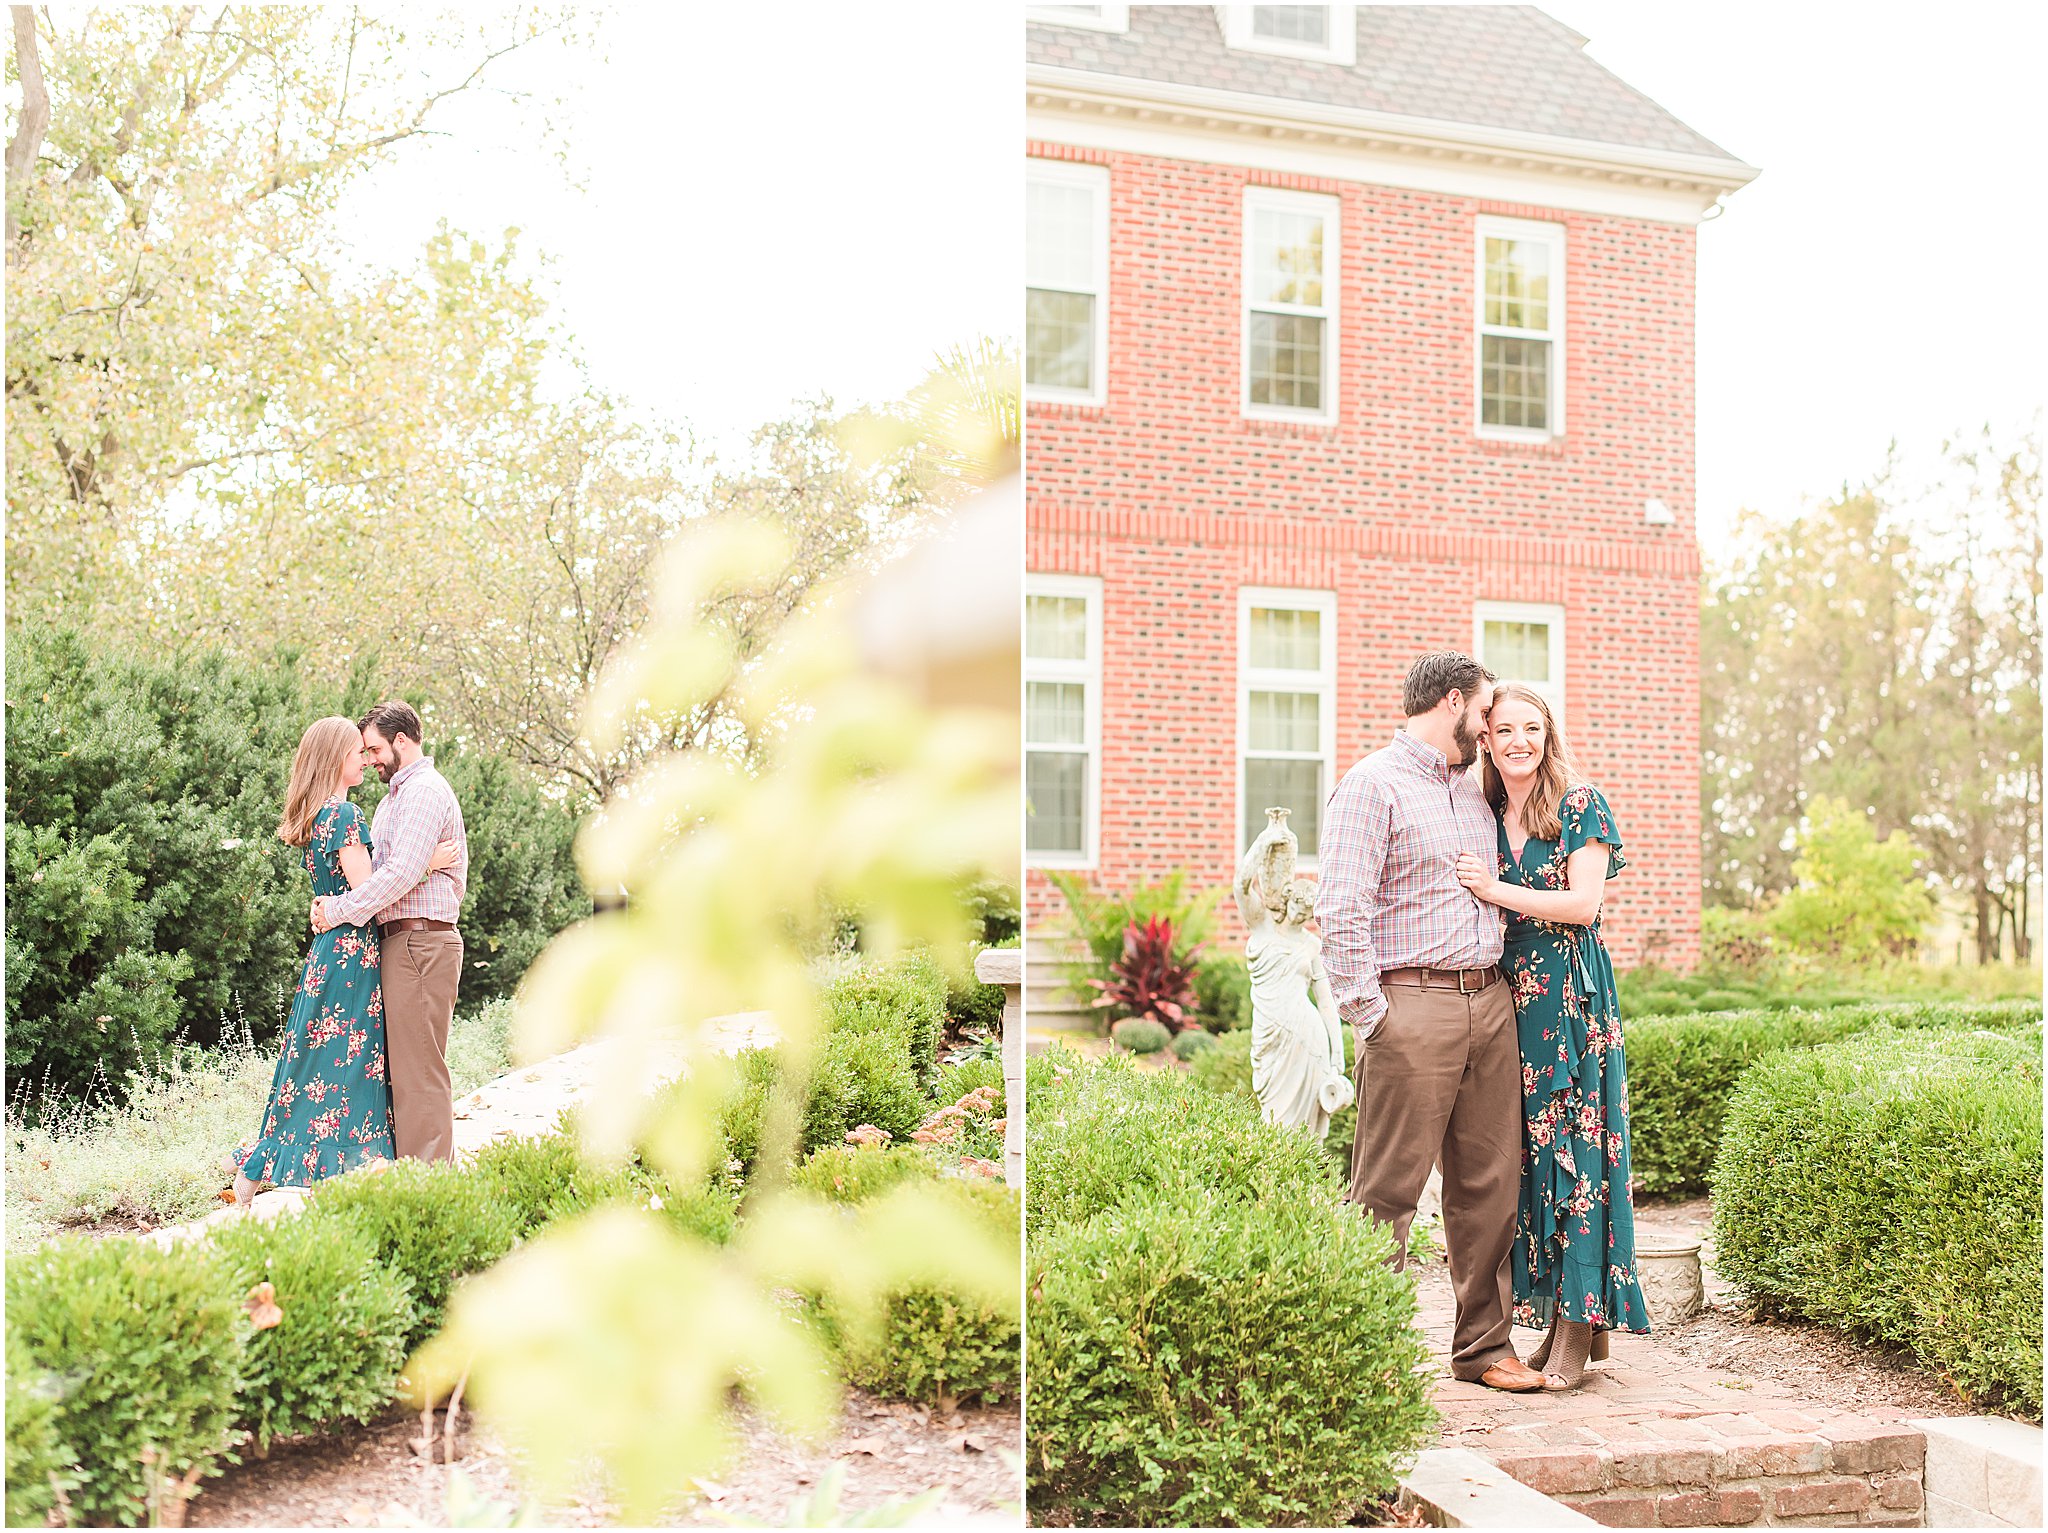 Bride and groom nuzzling during Coxhall Gardens engagement session